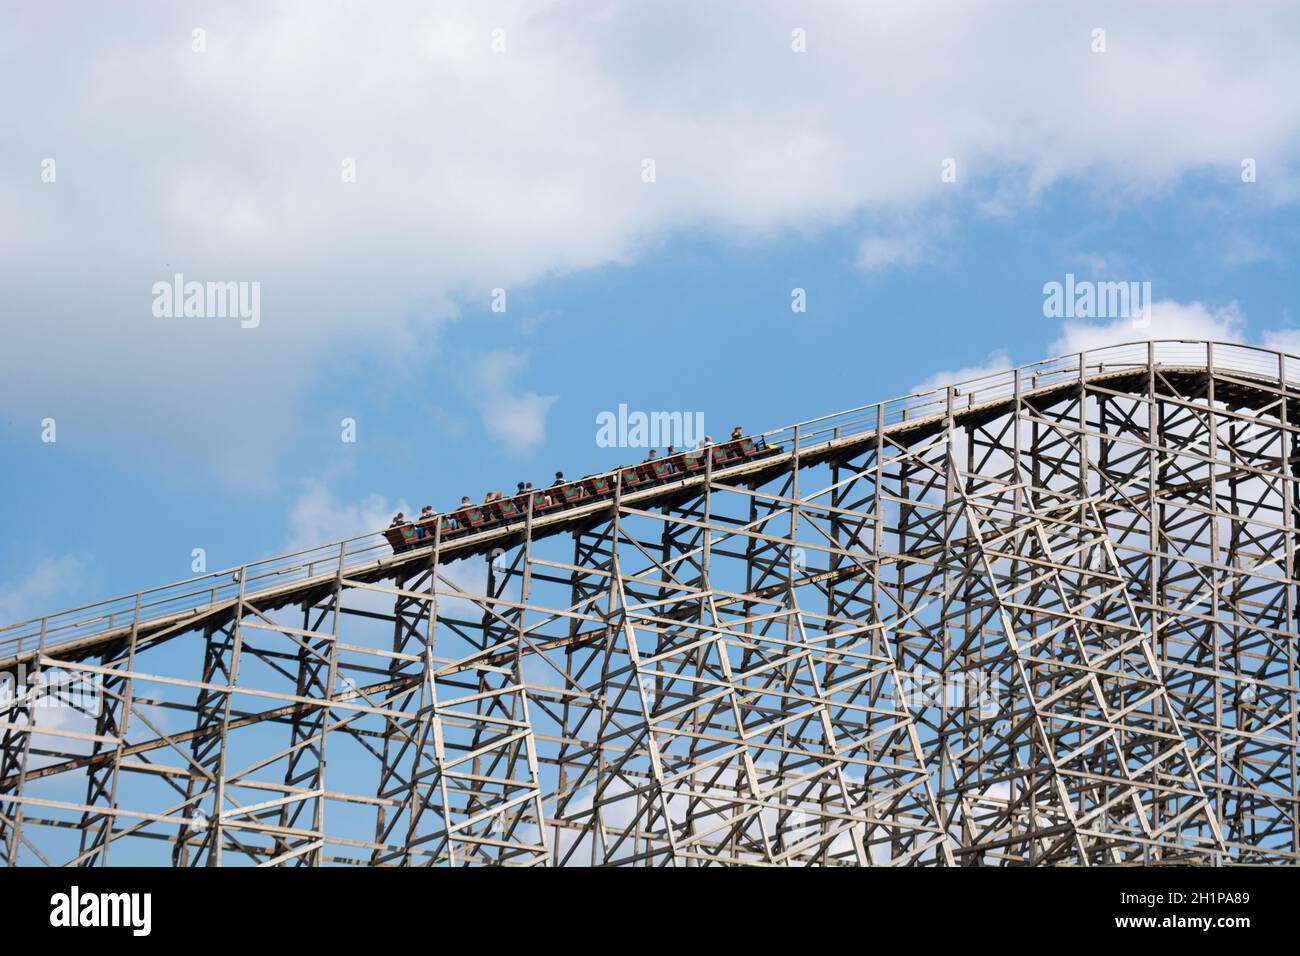 Unrecognizable persons on a roller coaster in an amusement park. Stock Photo